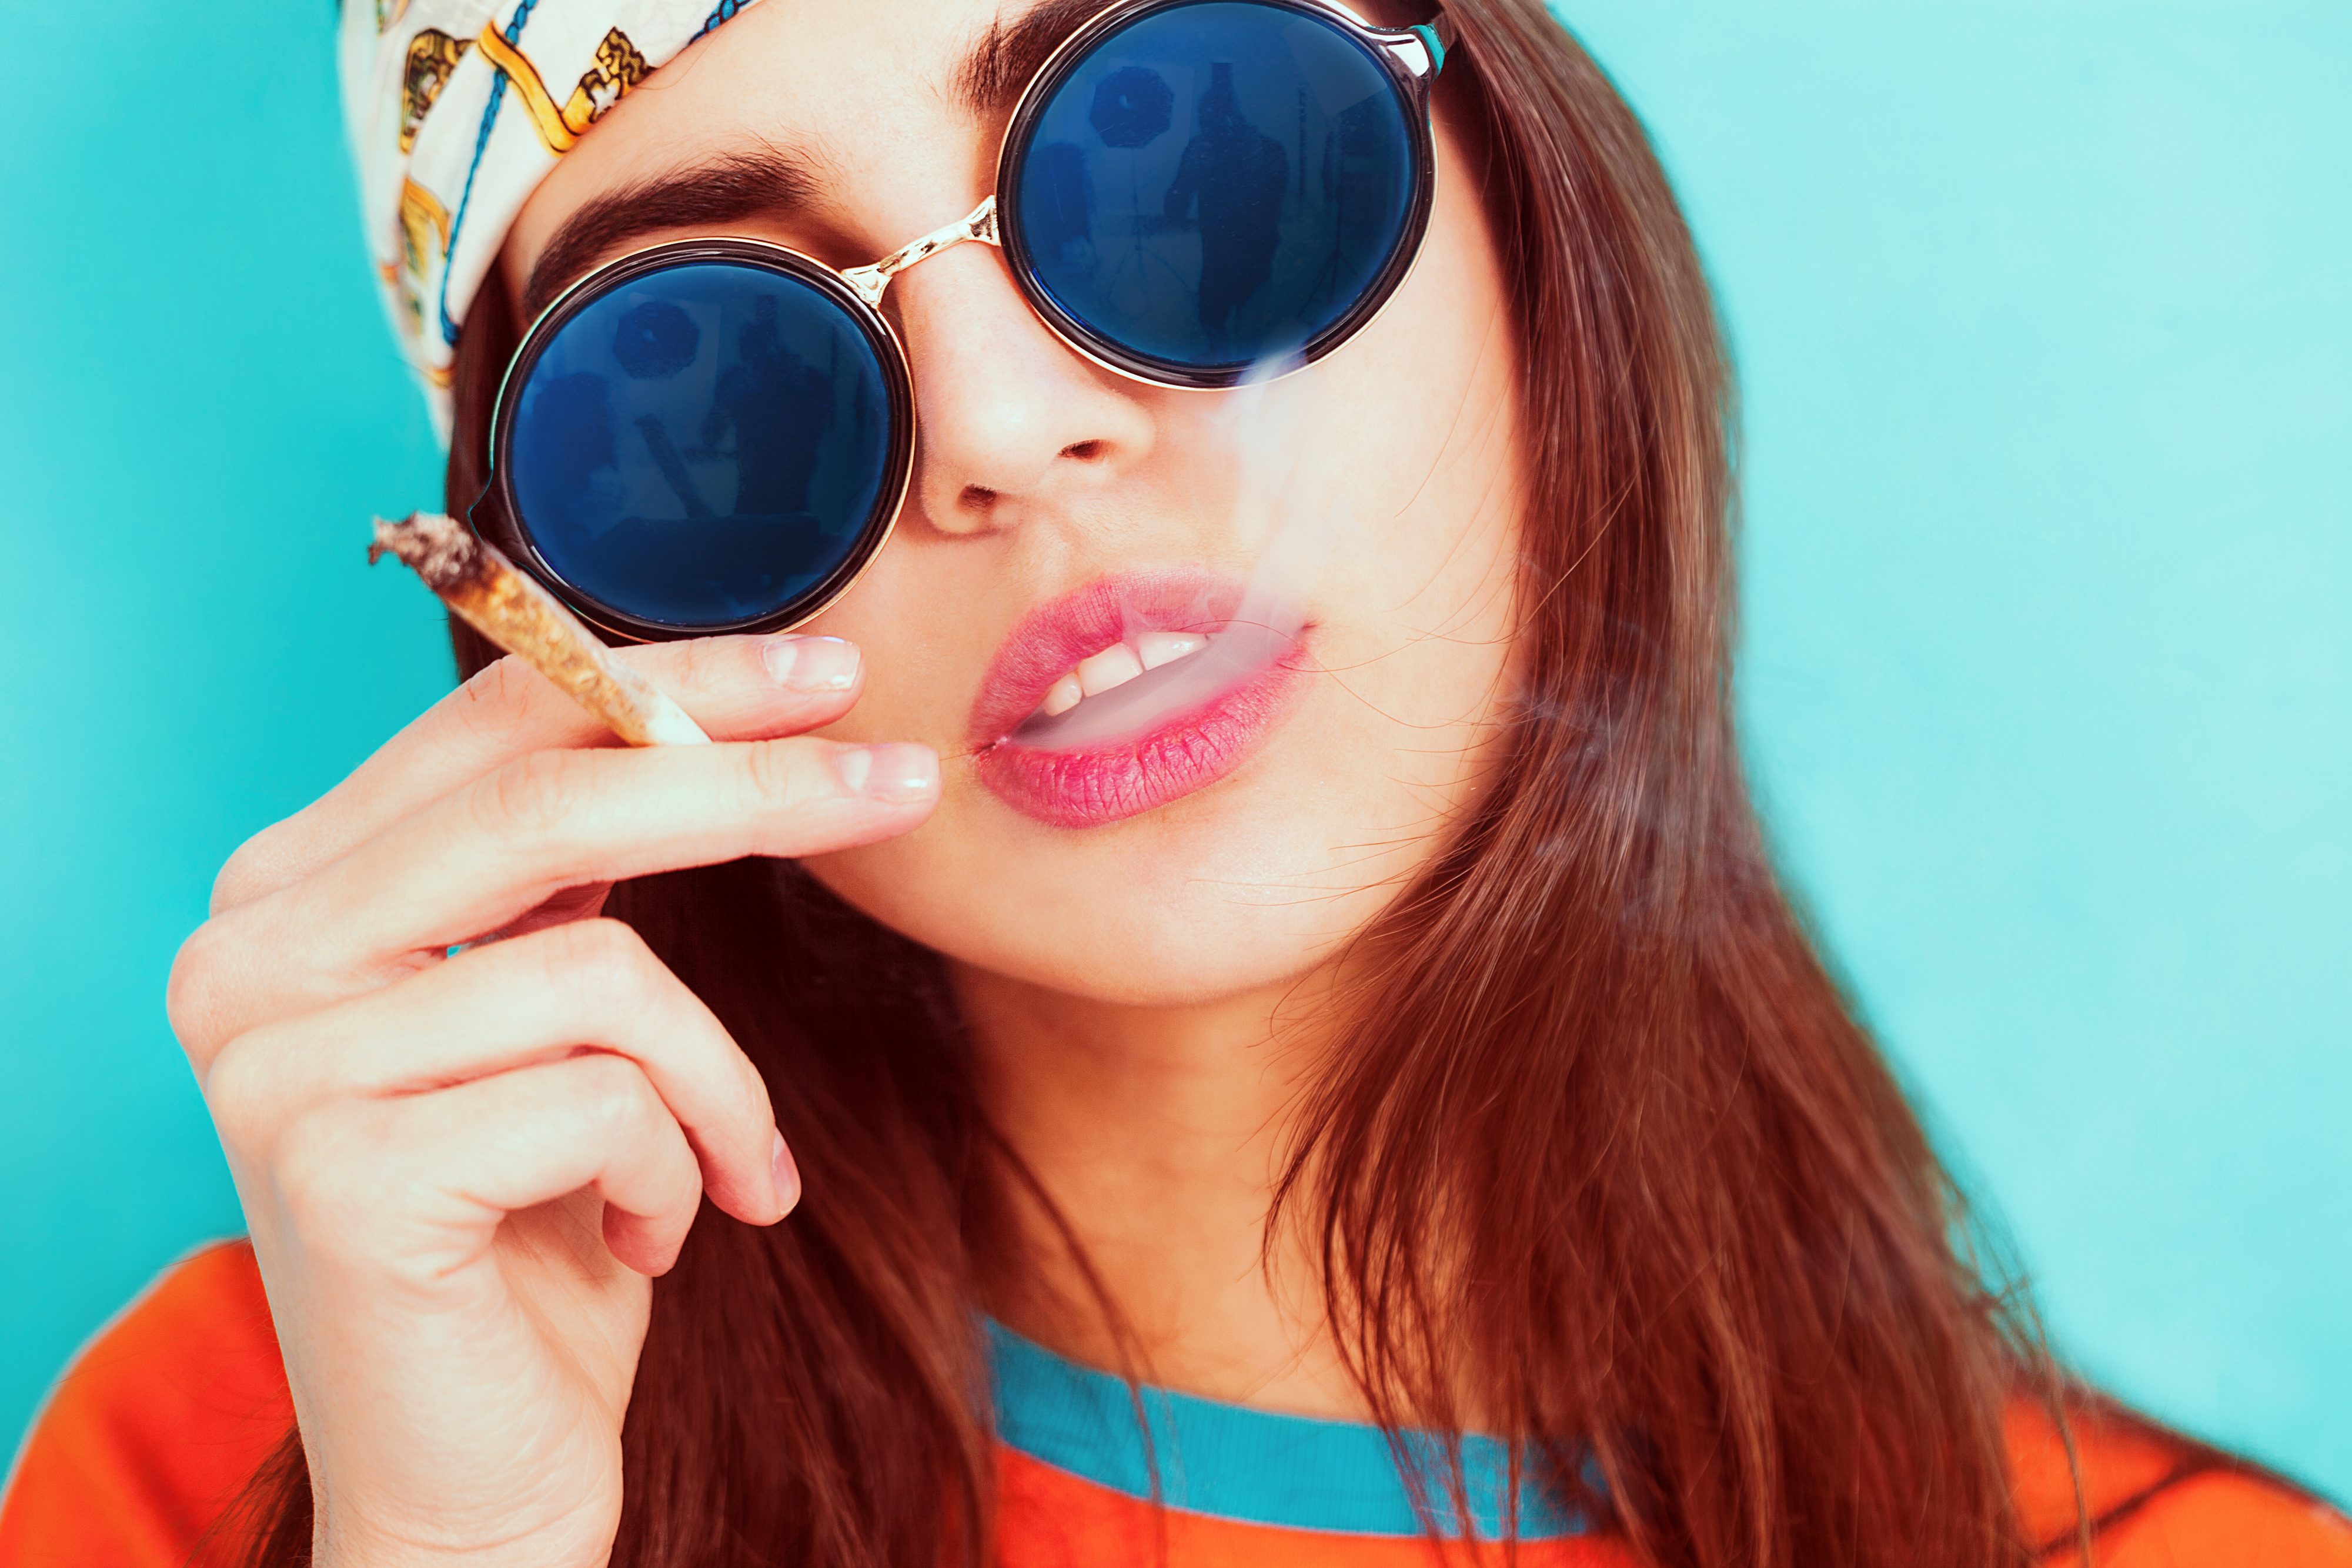 Girl smoking weed. (Getty Images)